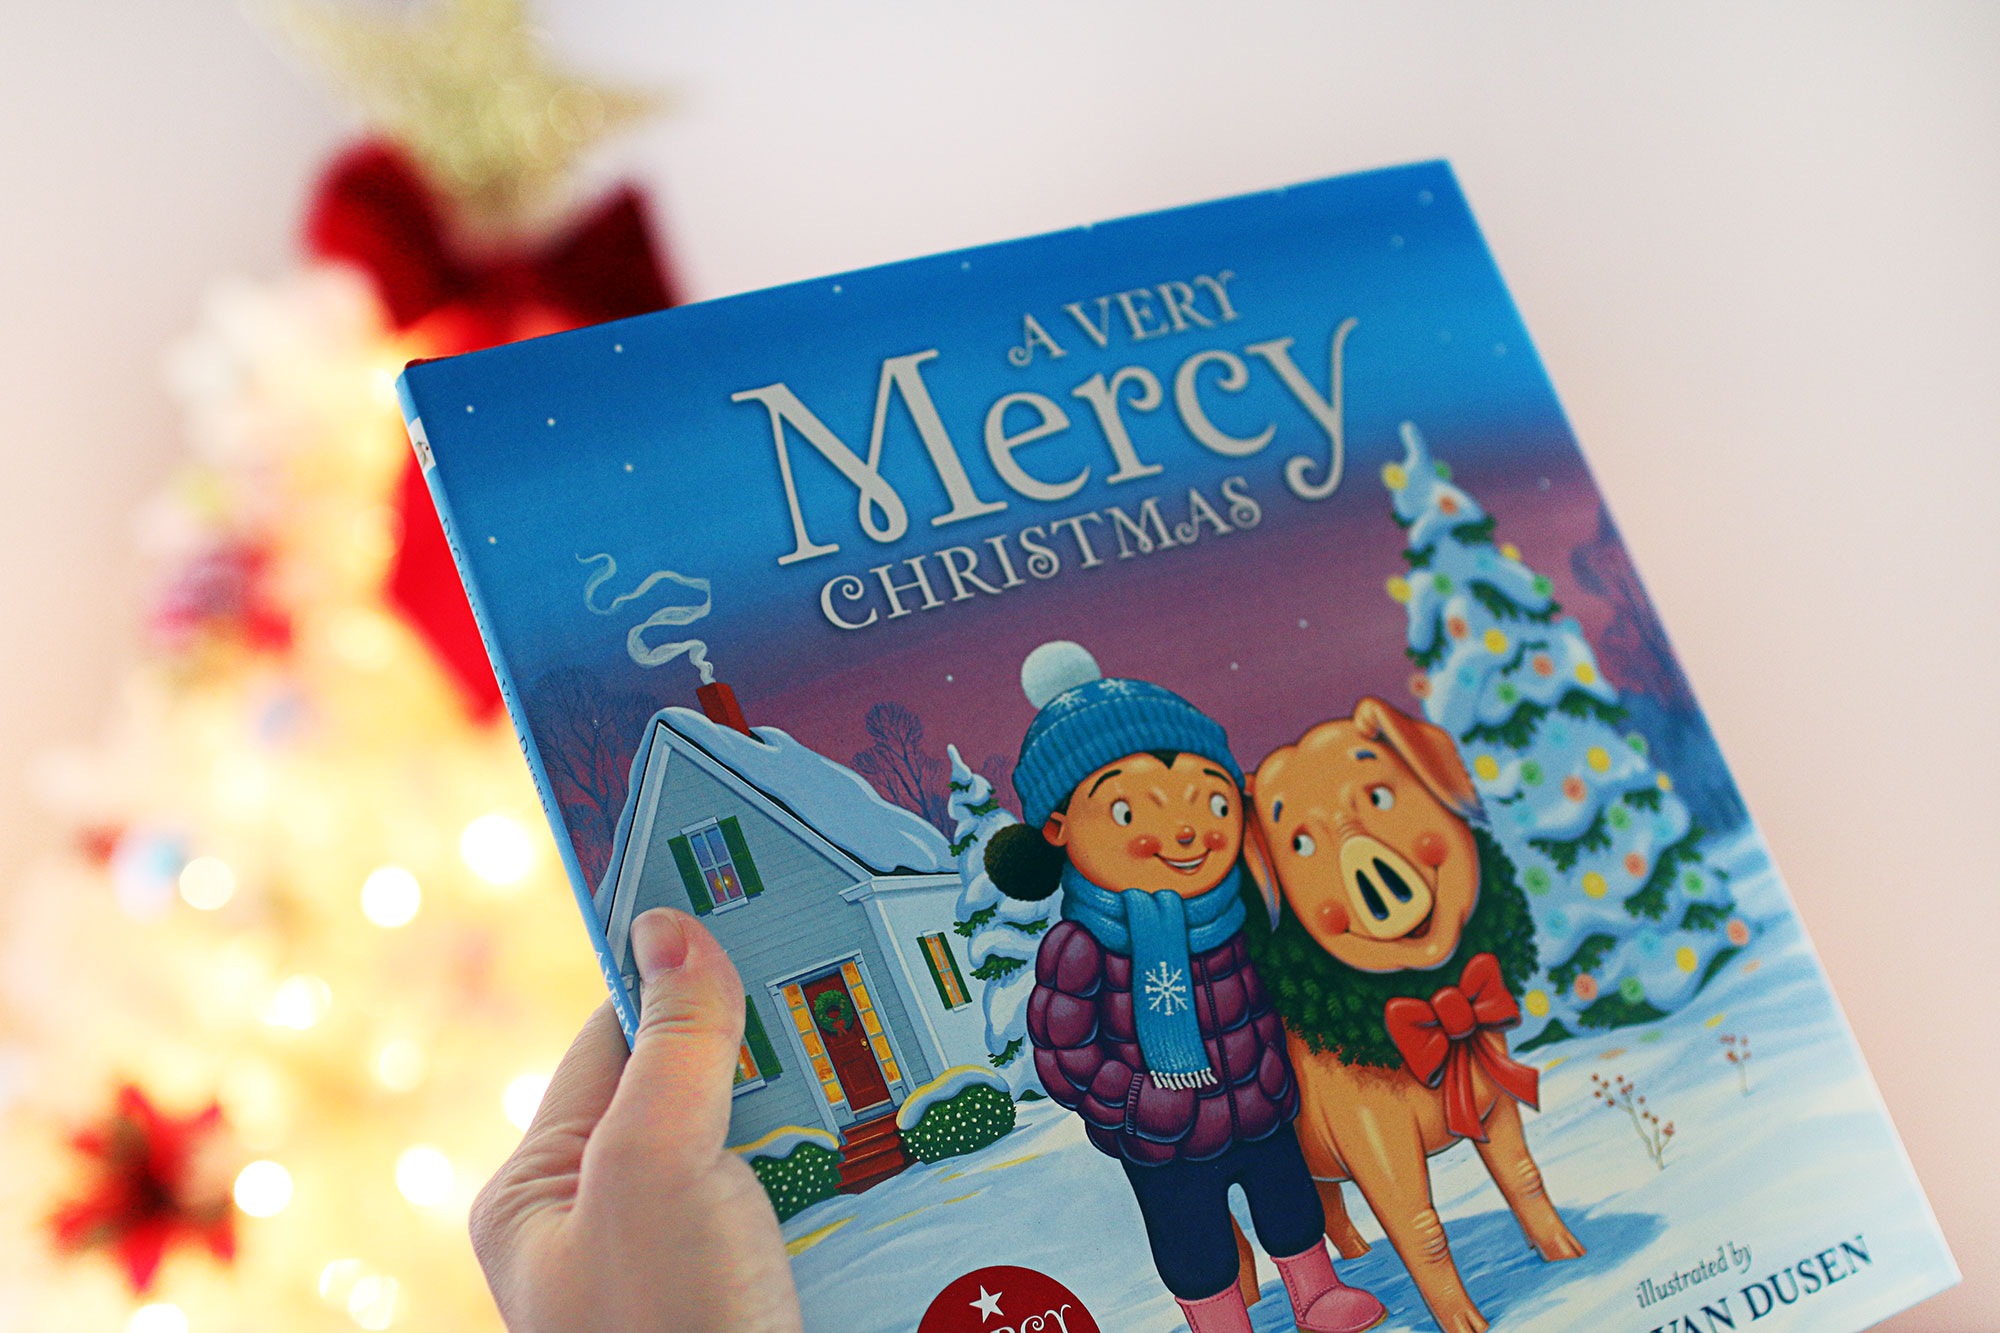 Candlewick Press, Candlewick Press Books, A Very Mercy Christmas, Katie DiCamillo, Chris Van Dusen Illustration, Book Feature, Book Review